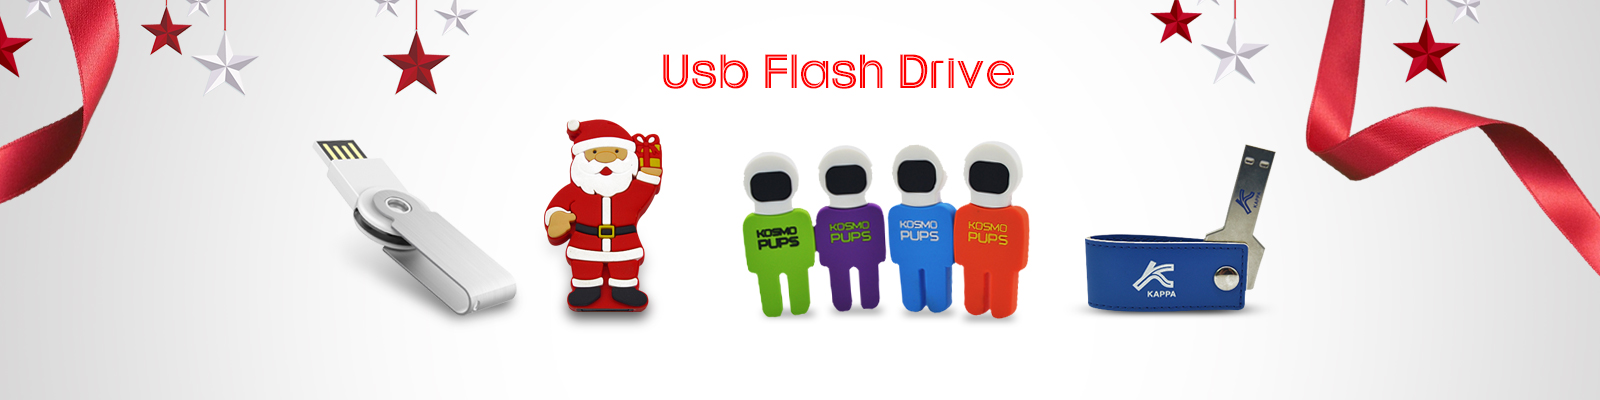 4gb flash drive | Usb device | Usb | Usb business card | leadway group limited